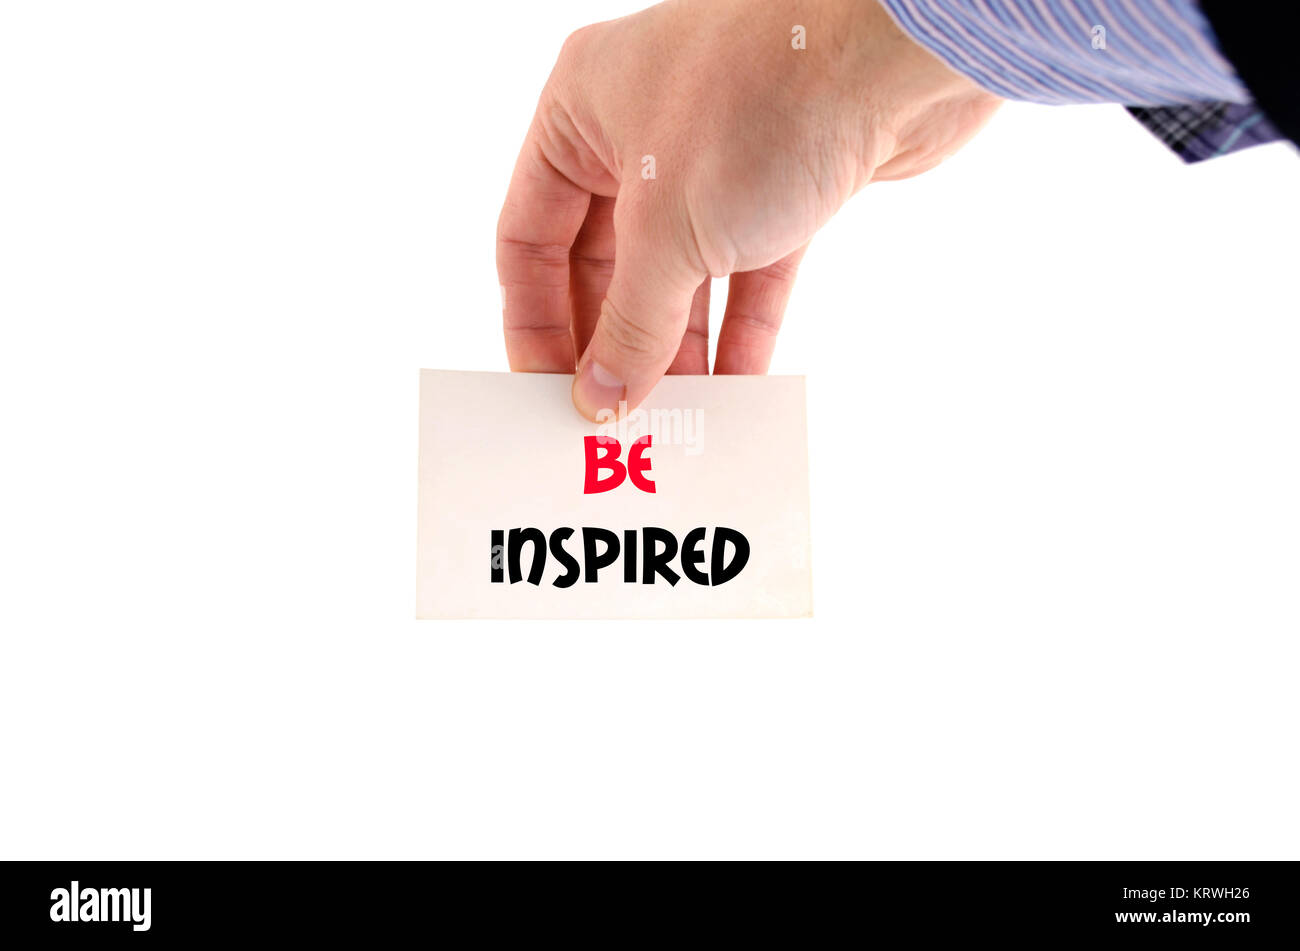 Be inspired text concept Stock Photo